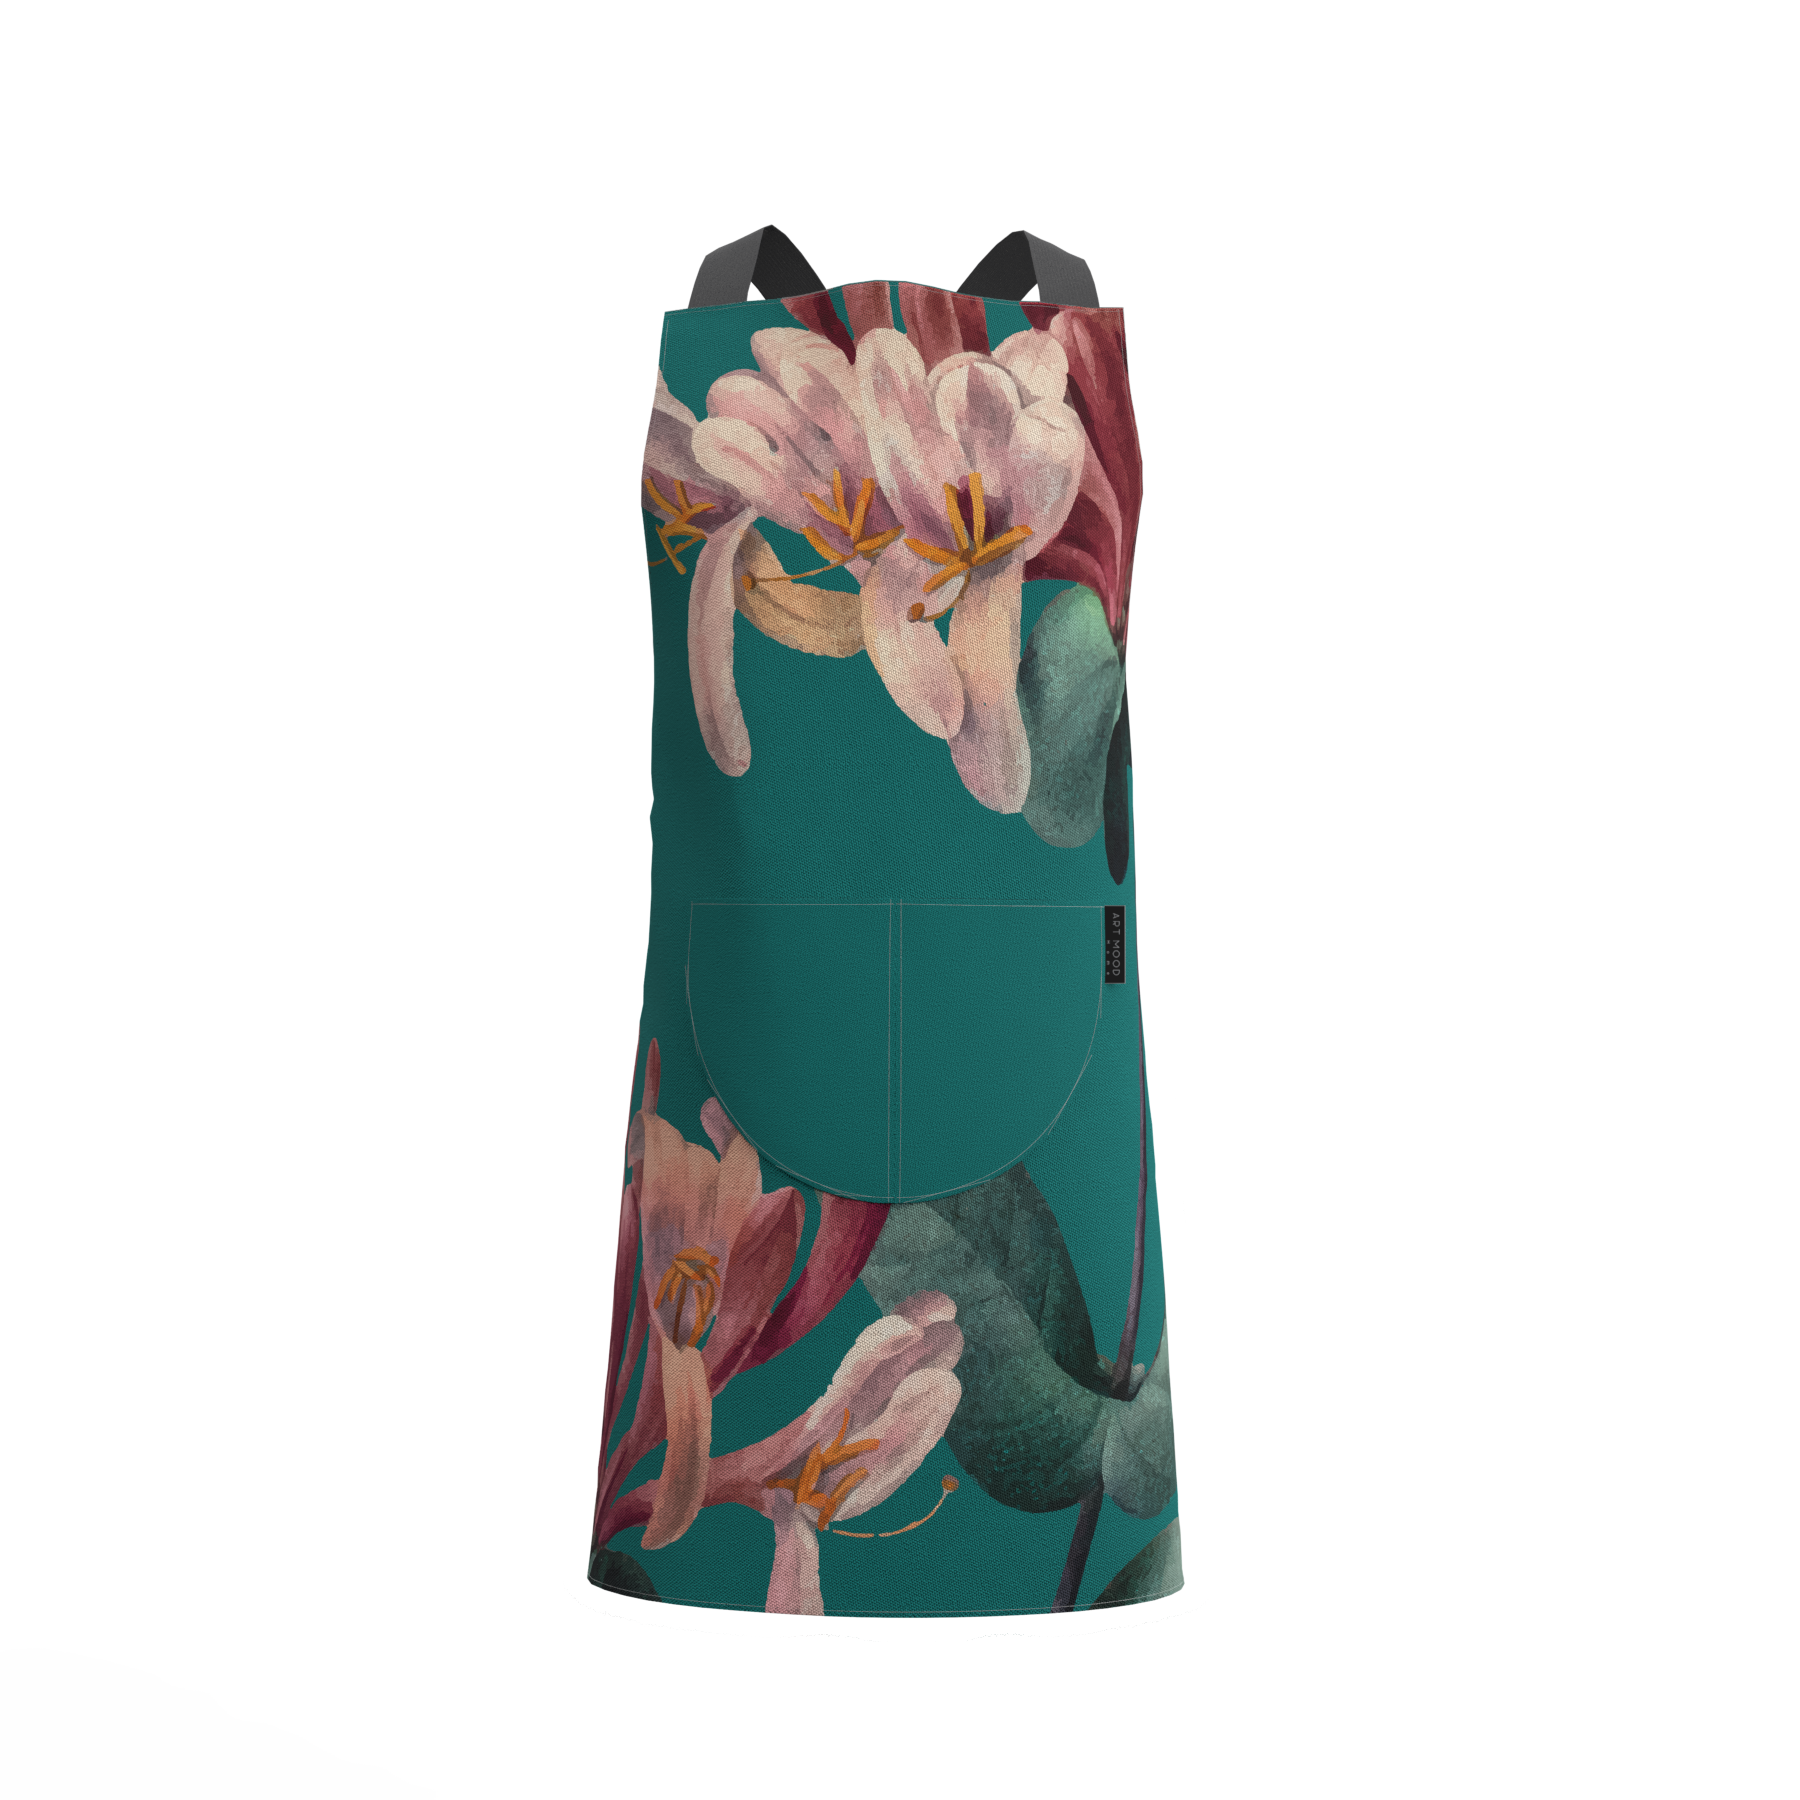 Teal Roses Apron